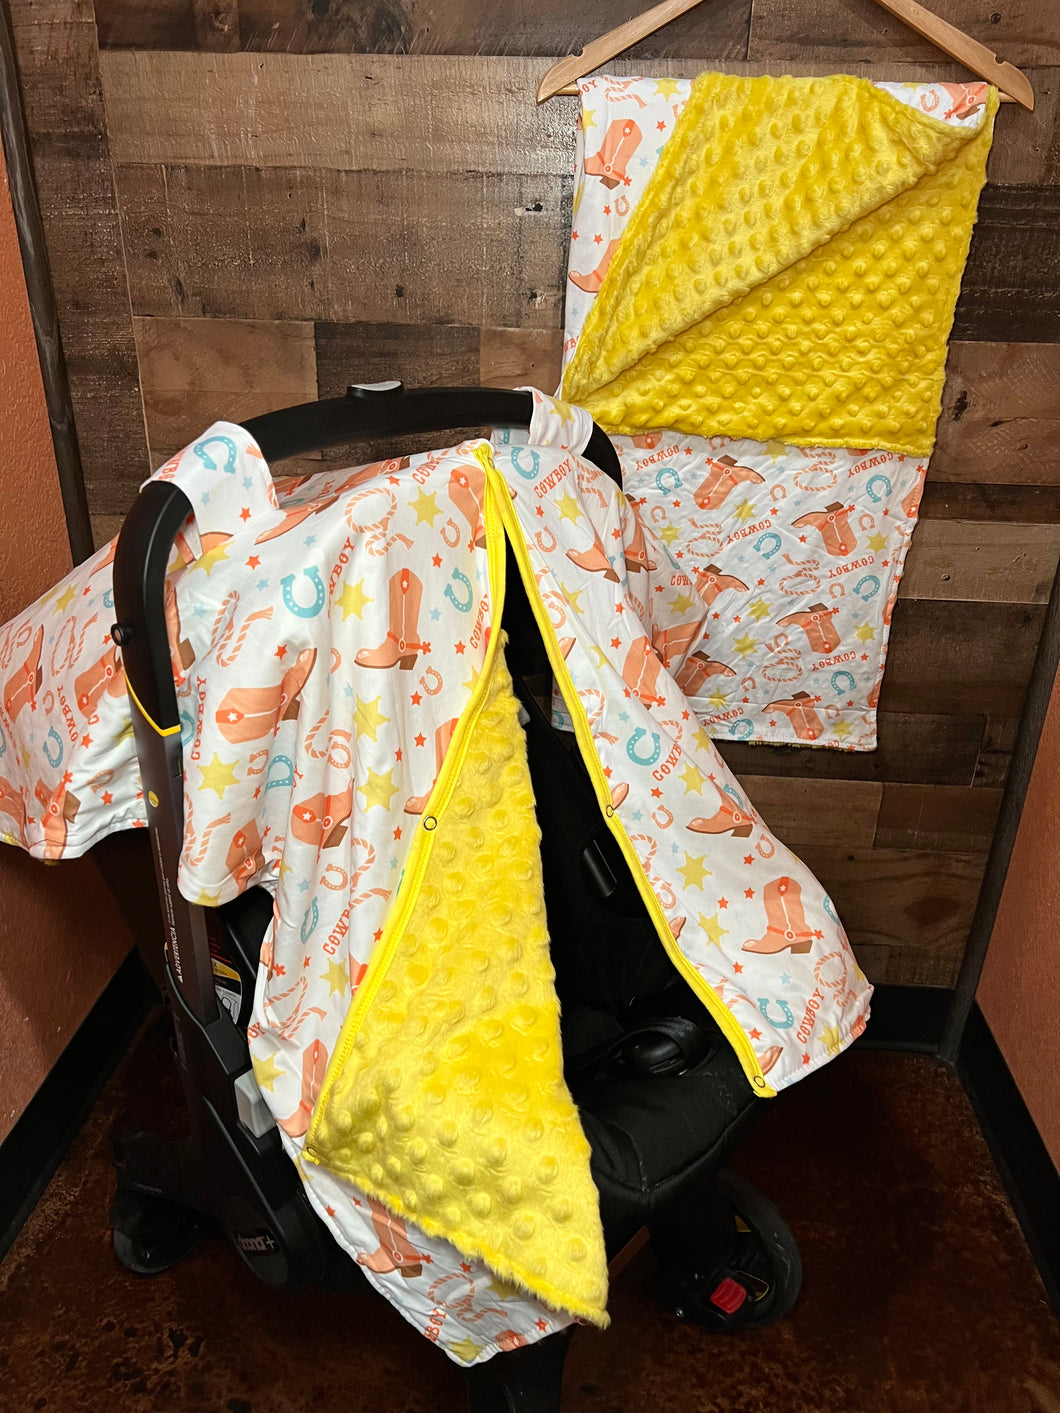 Western Baby Blanket & Car Seat Cover Set - Cowboy & Cowboy Boots